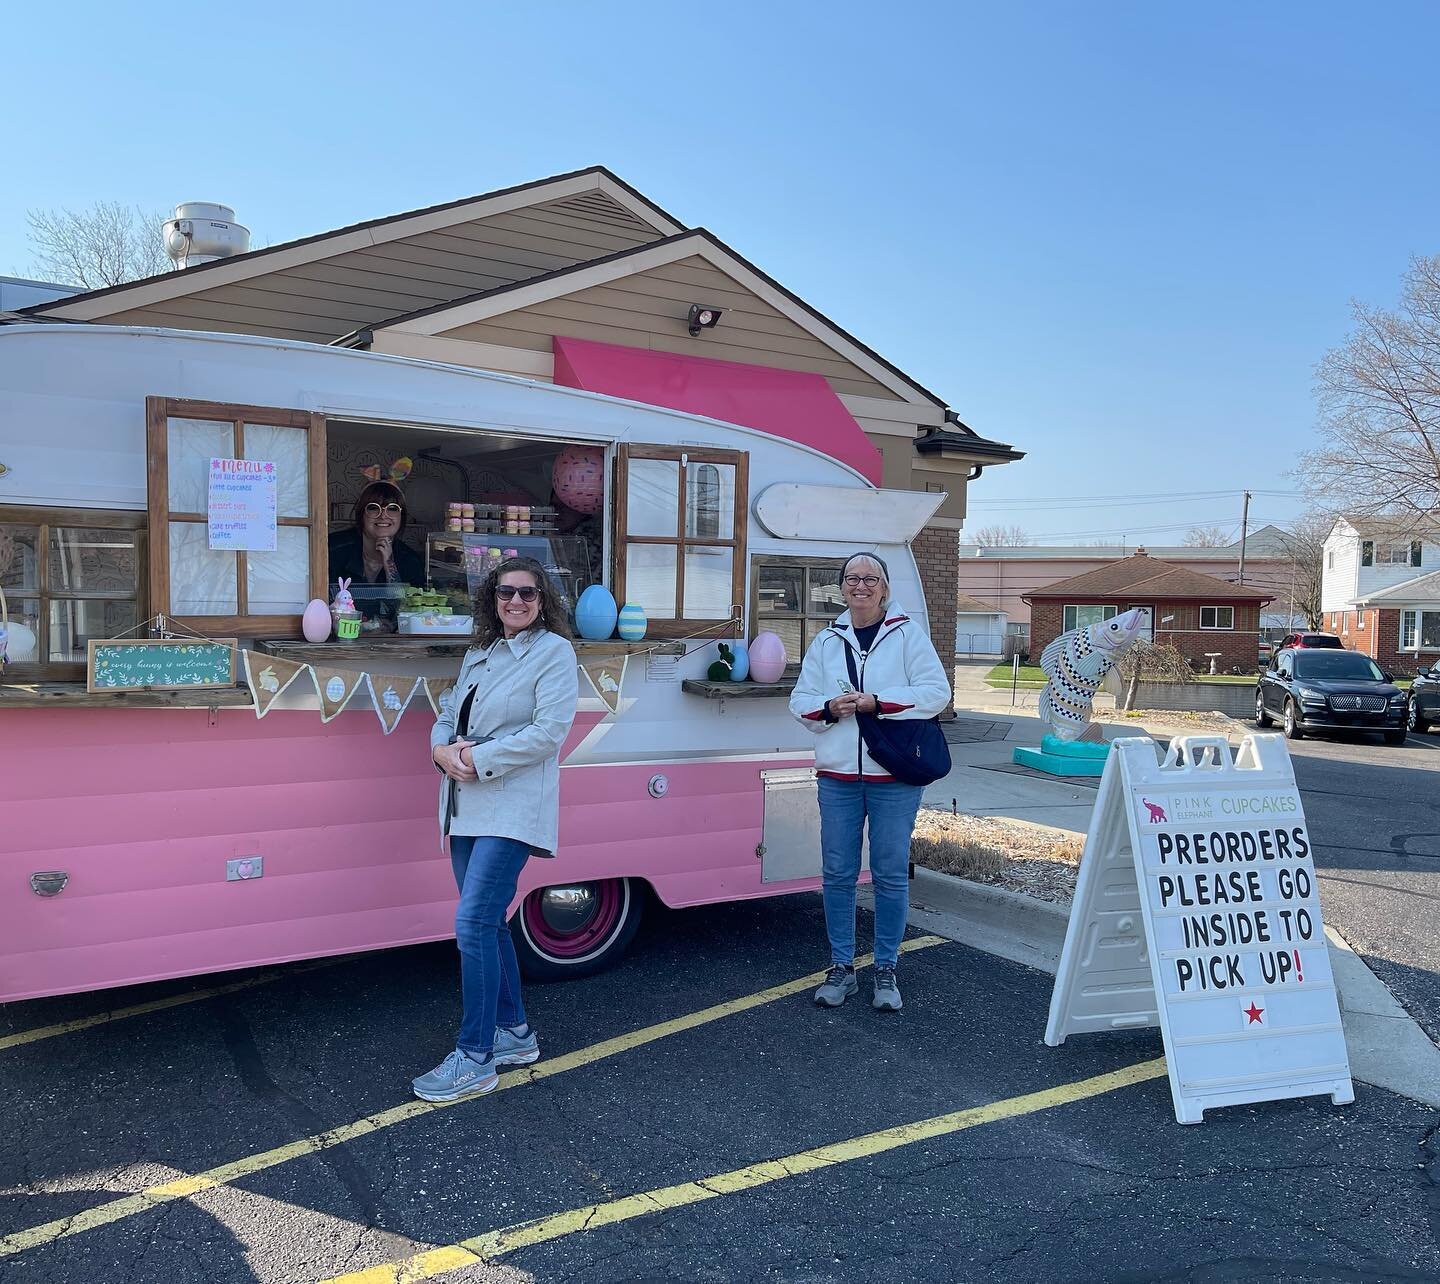 Happy Easter! The trailer is back with treats and coffee along with the store front being stocked with goodies for everybunny! We are here til 2, hop on over! 🌷🌞🪺#pinkelephantcupcakes #shopsmall #eastertreats #weloveourcustomers #pinkpinkpink #stc